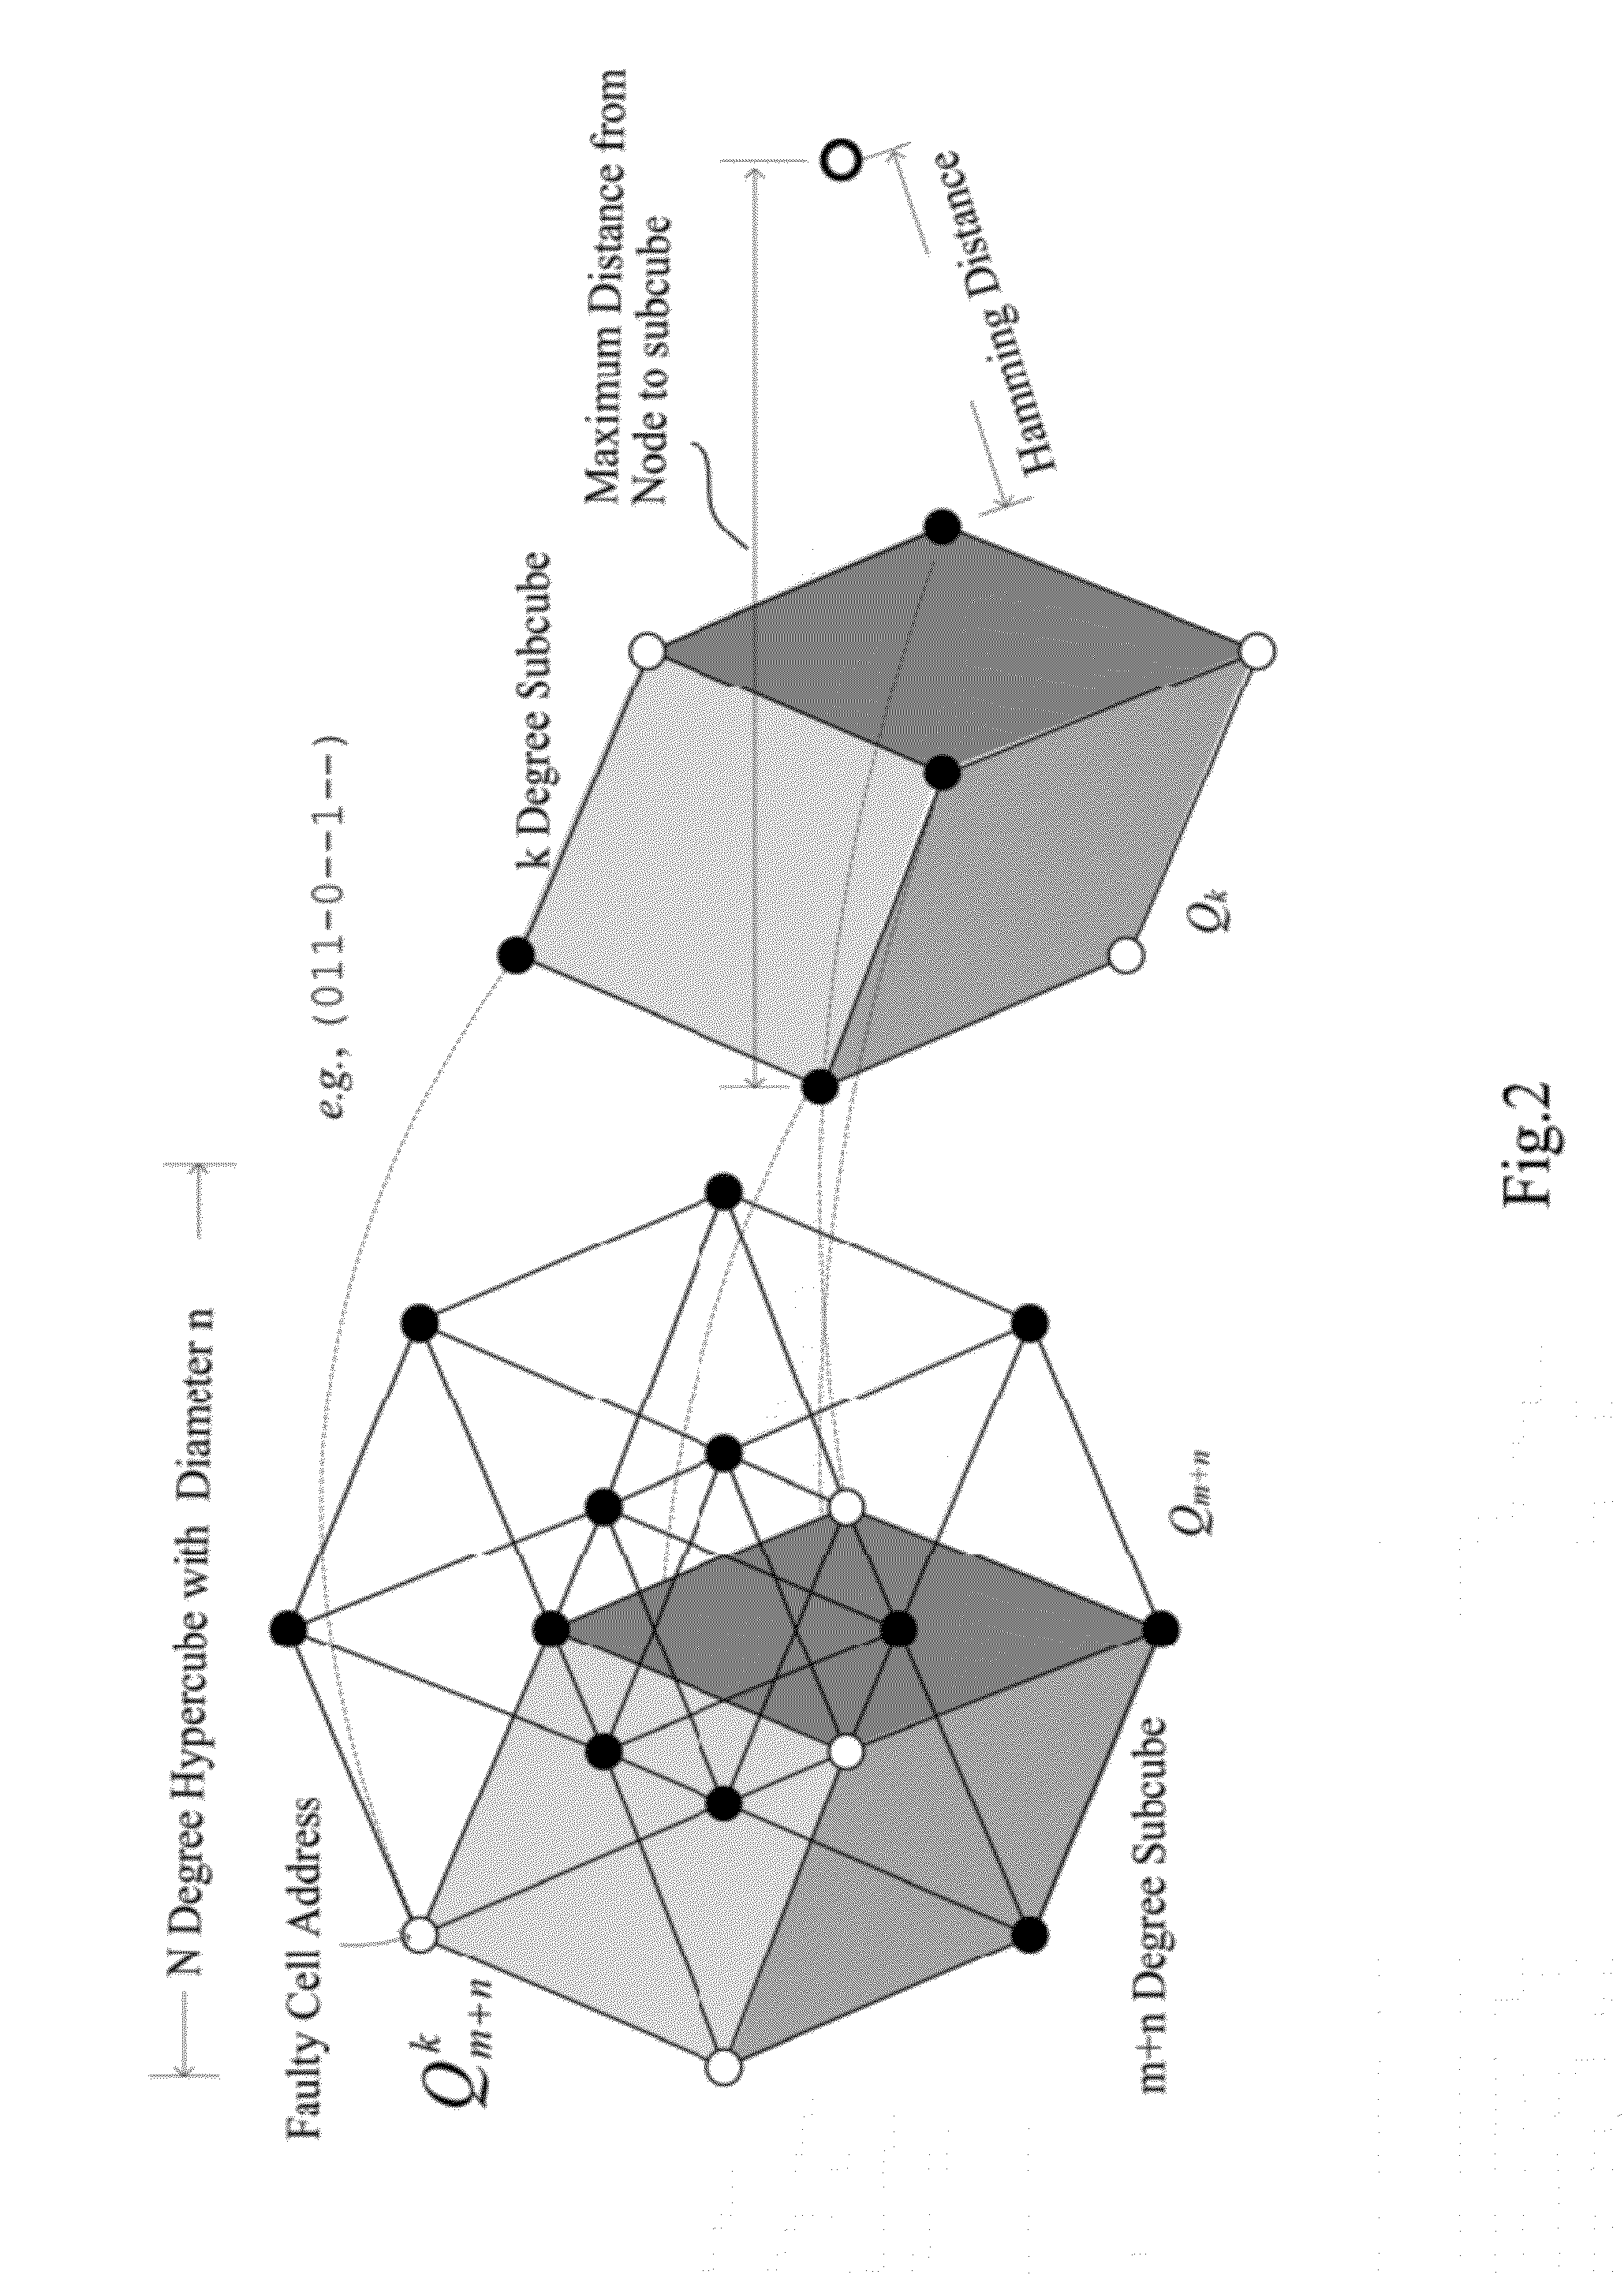 Memory address remapping architecture and repairing method thereof